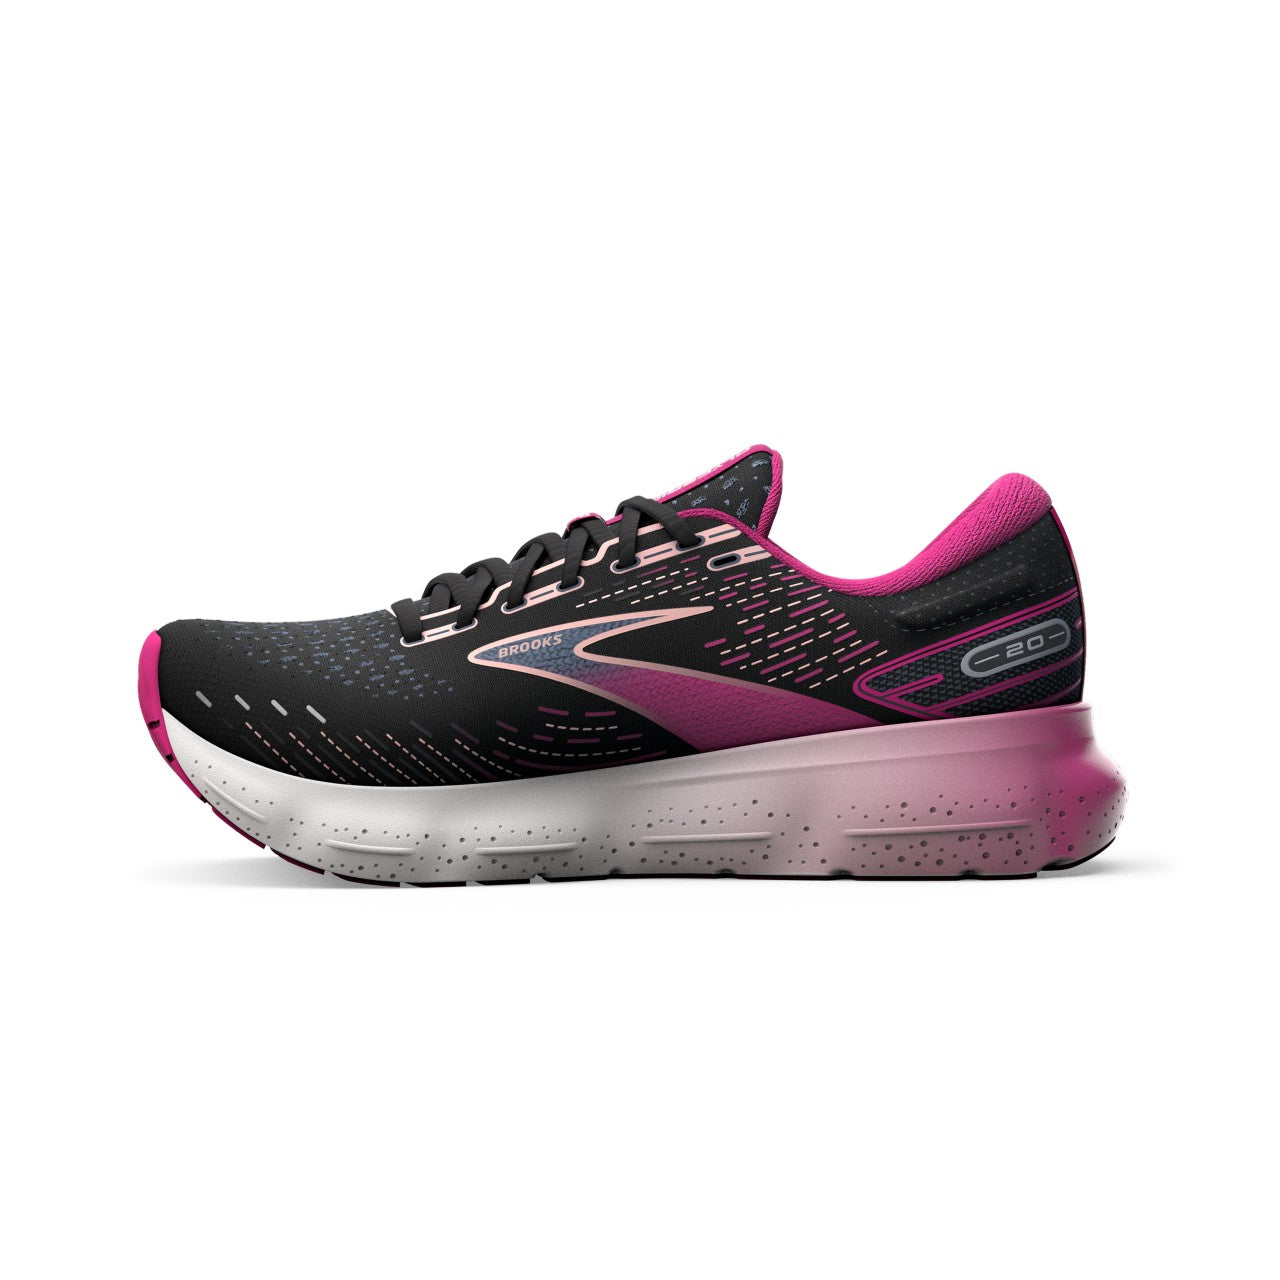 PureGrit 6 Womens B (STANDARD WIDTH) Trail Running Shoes Diva  Pink/Nightlife/Black - Shoes from Northern Runner UK